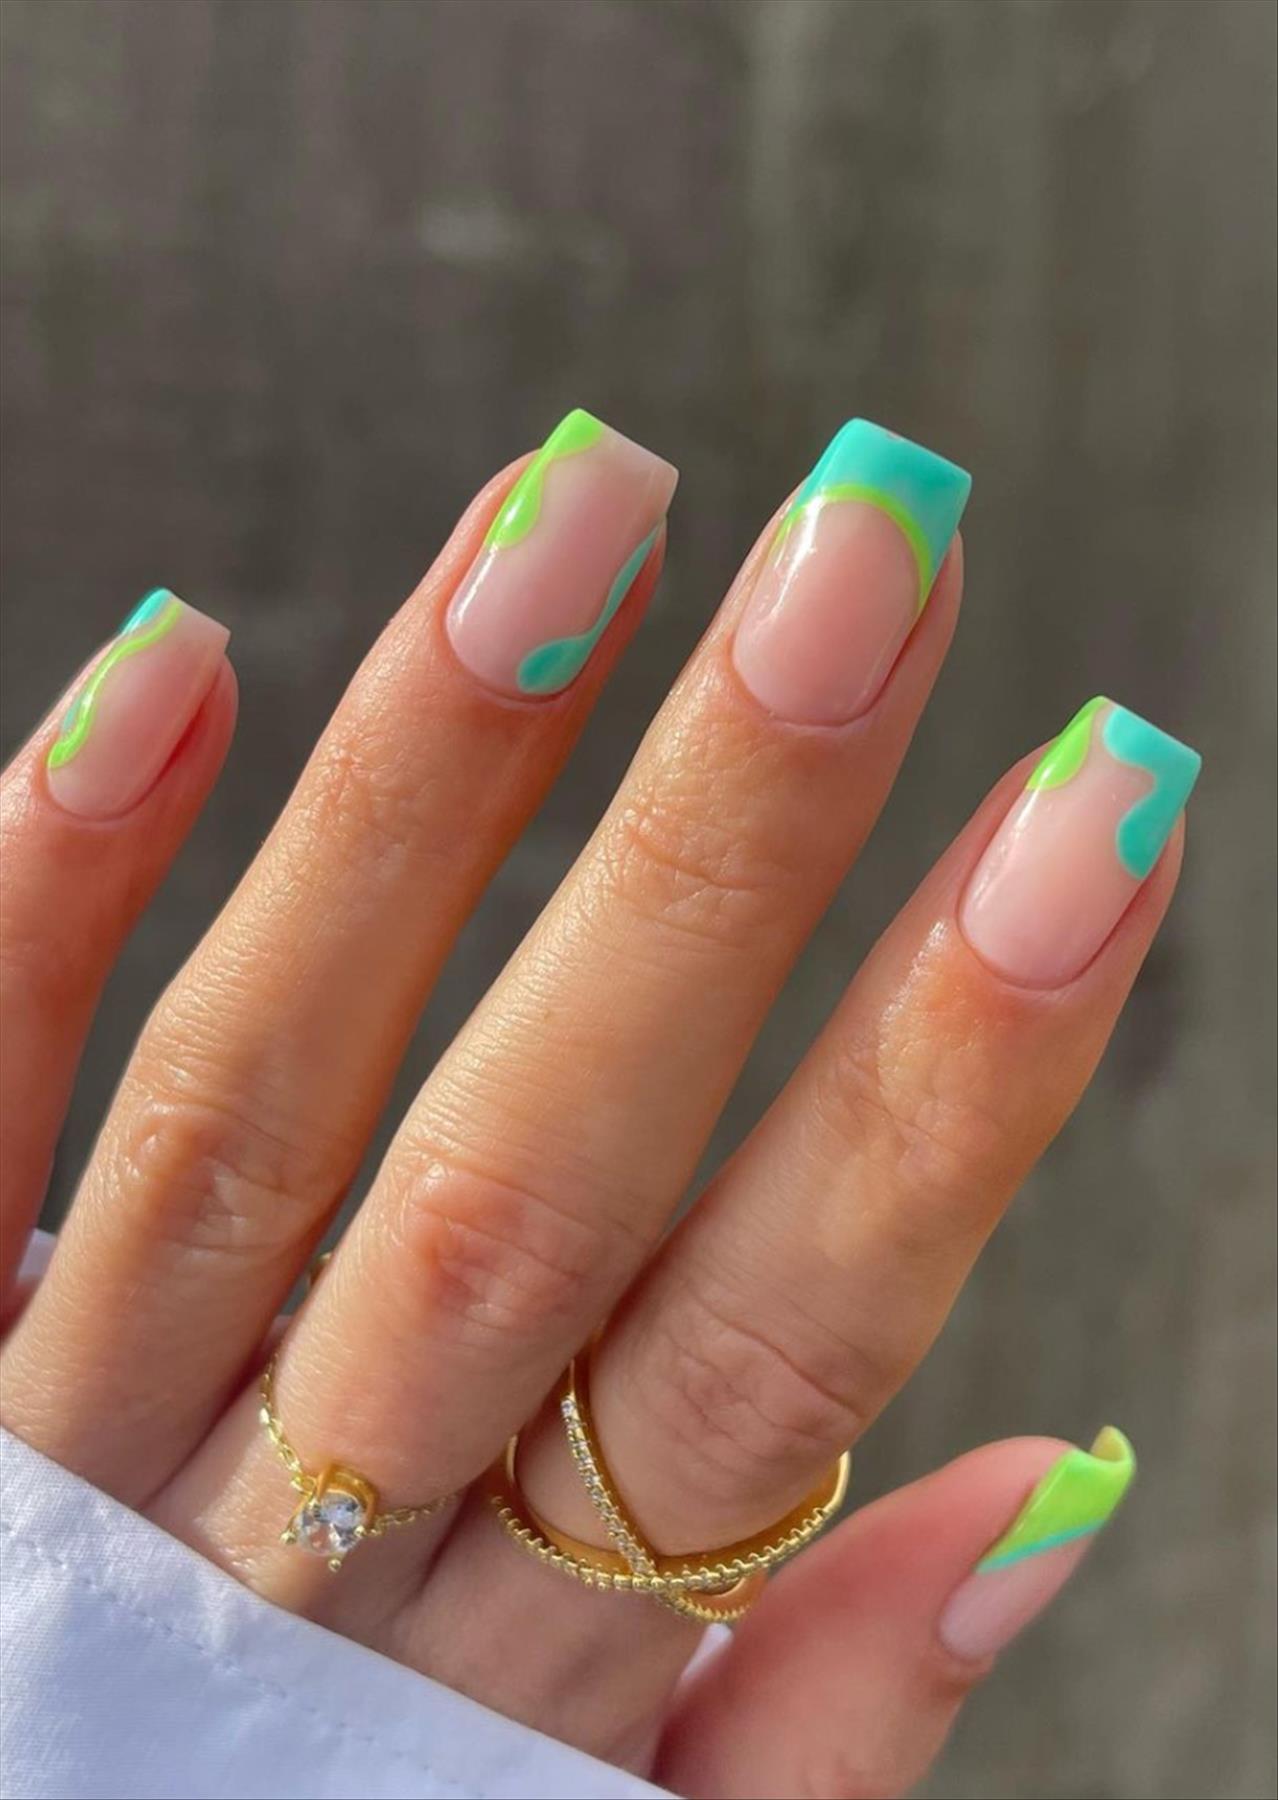 Elegant spring abstract nails and swirl nails to try